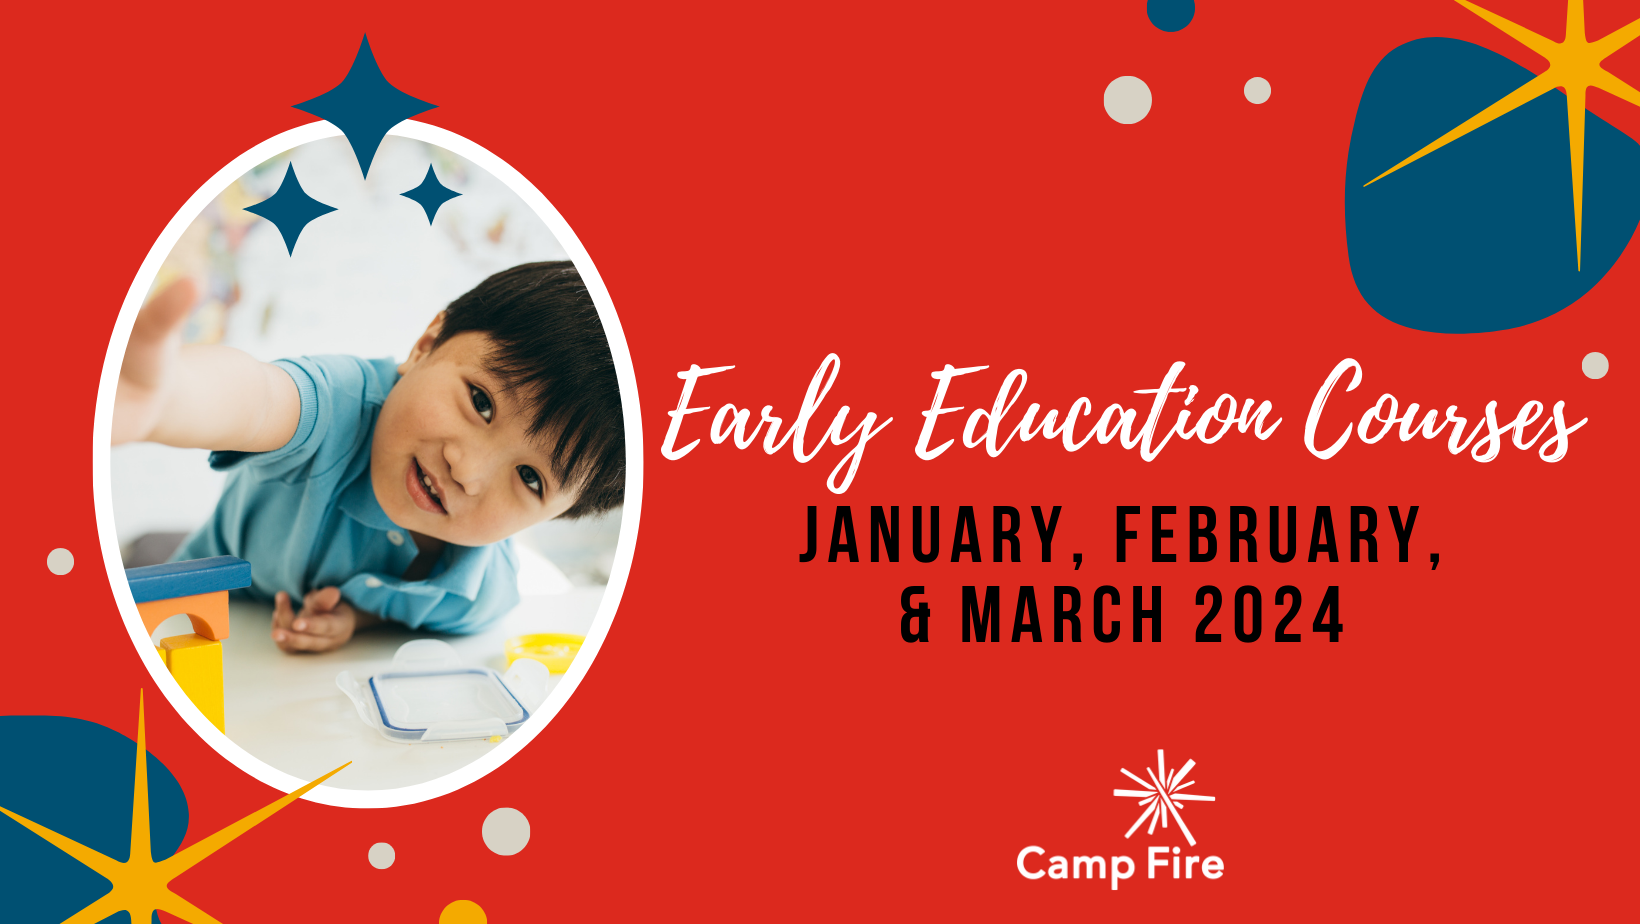 Early Education Courses: January, February & March 2024